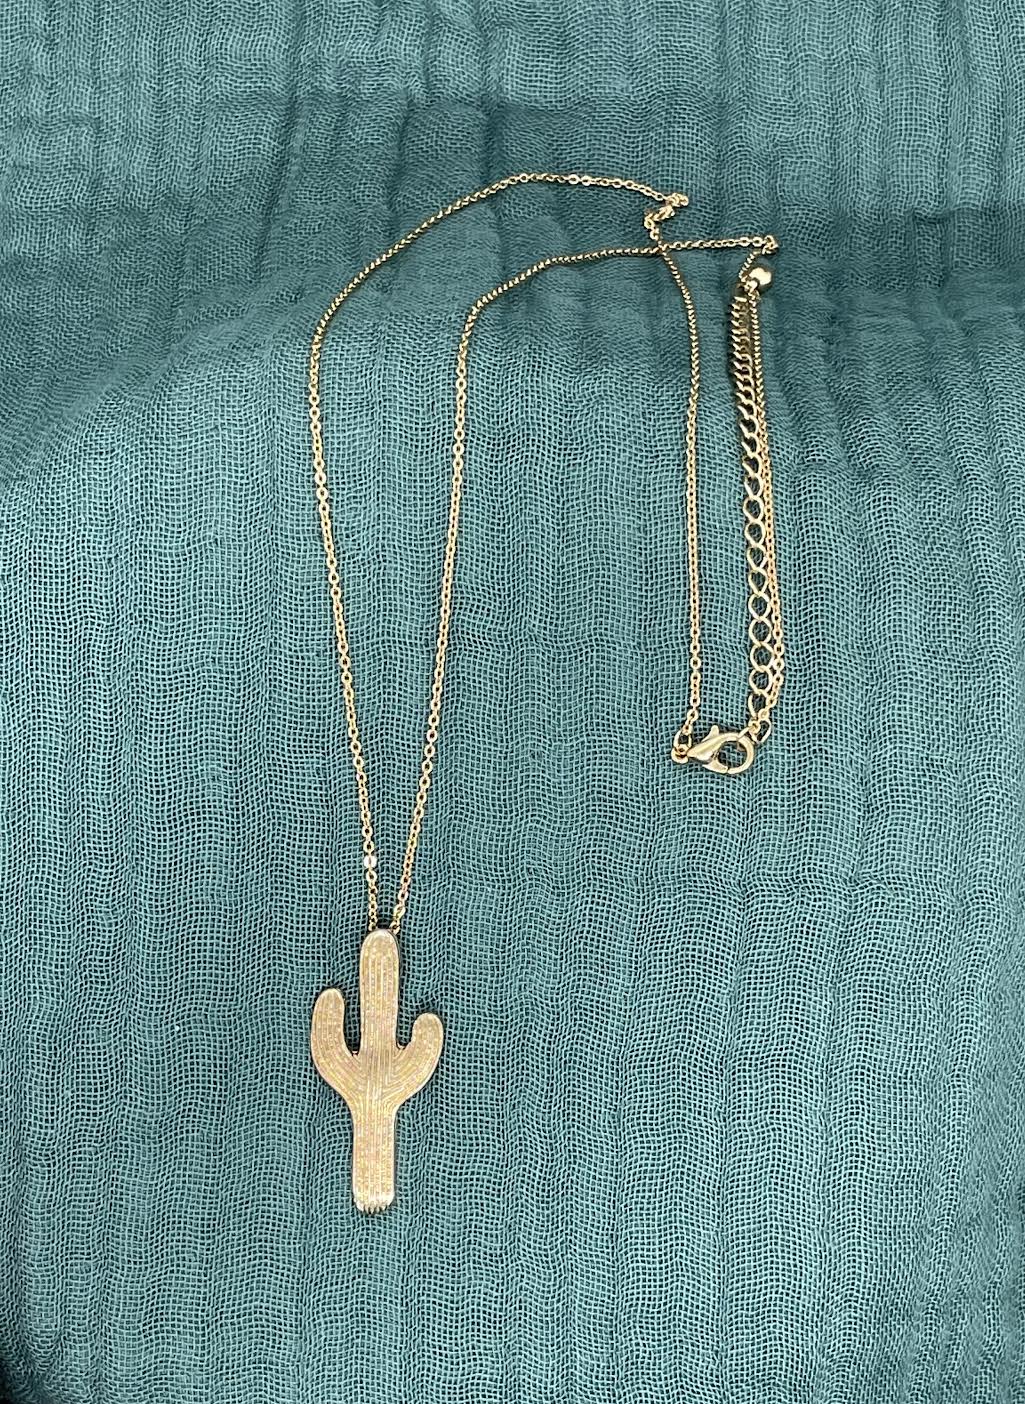 Cacti Necklace